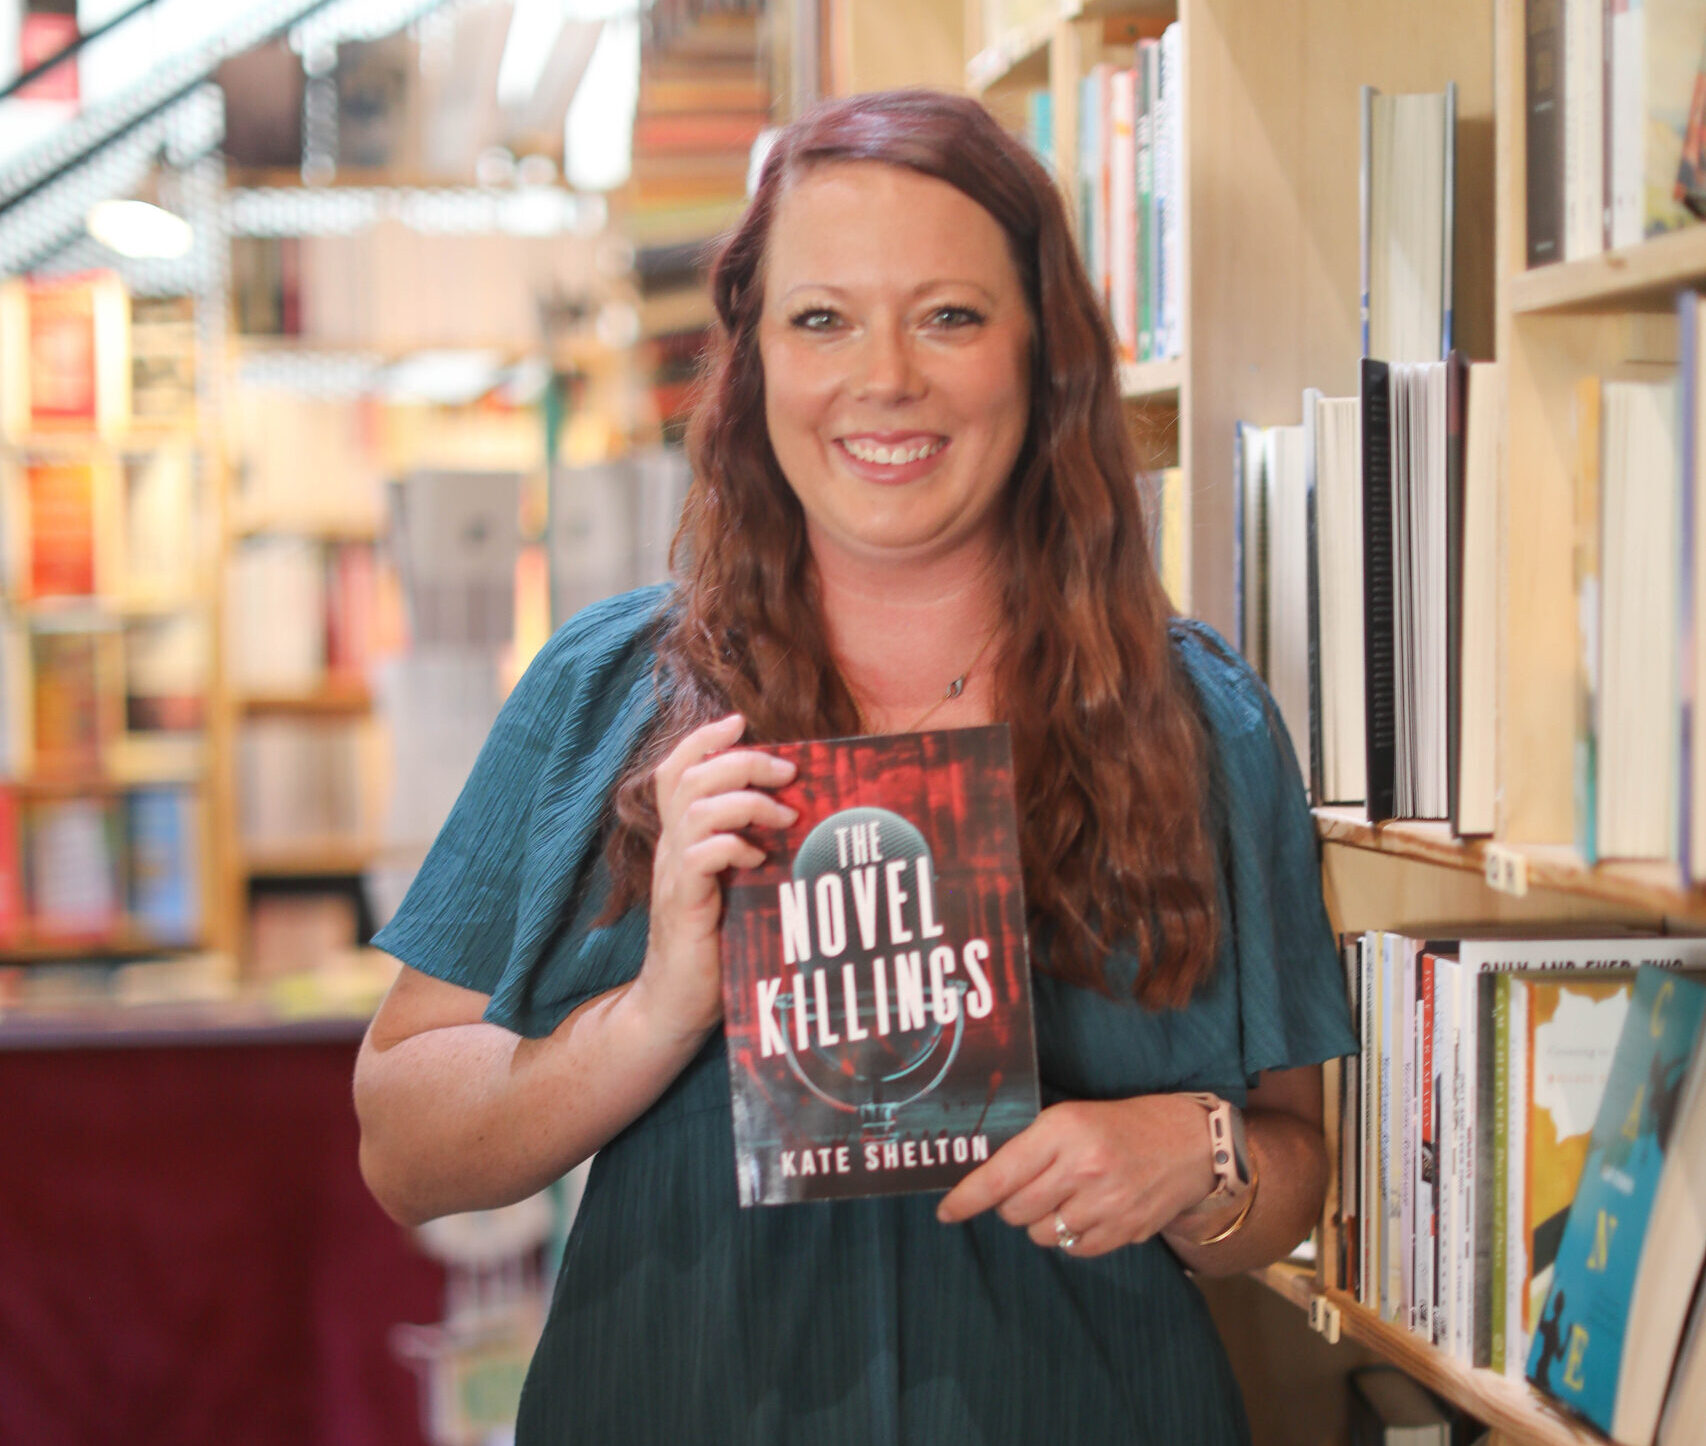 Fort Collins author publishes debut book: The Novel Killings